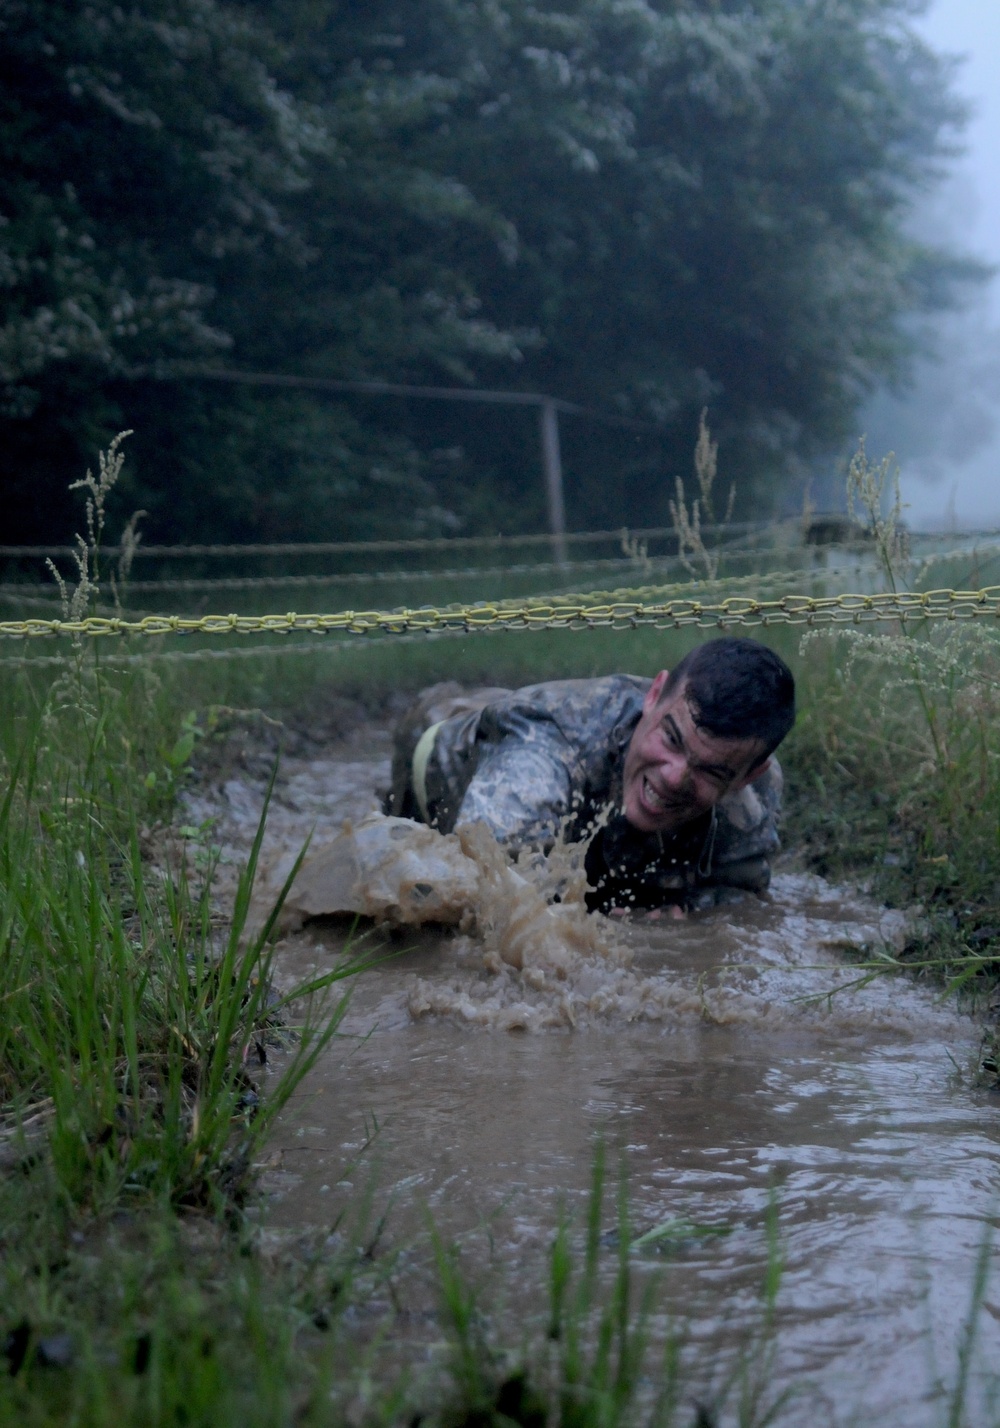 Getting muddy and building a team: Soldiers take on obstacle course at annual training